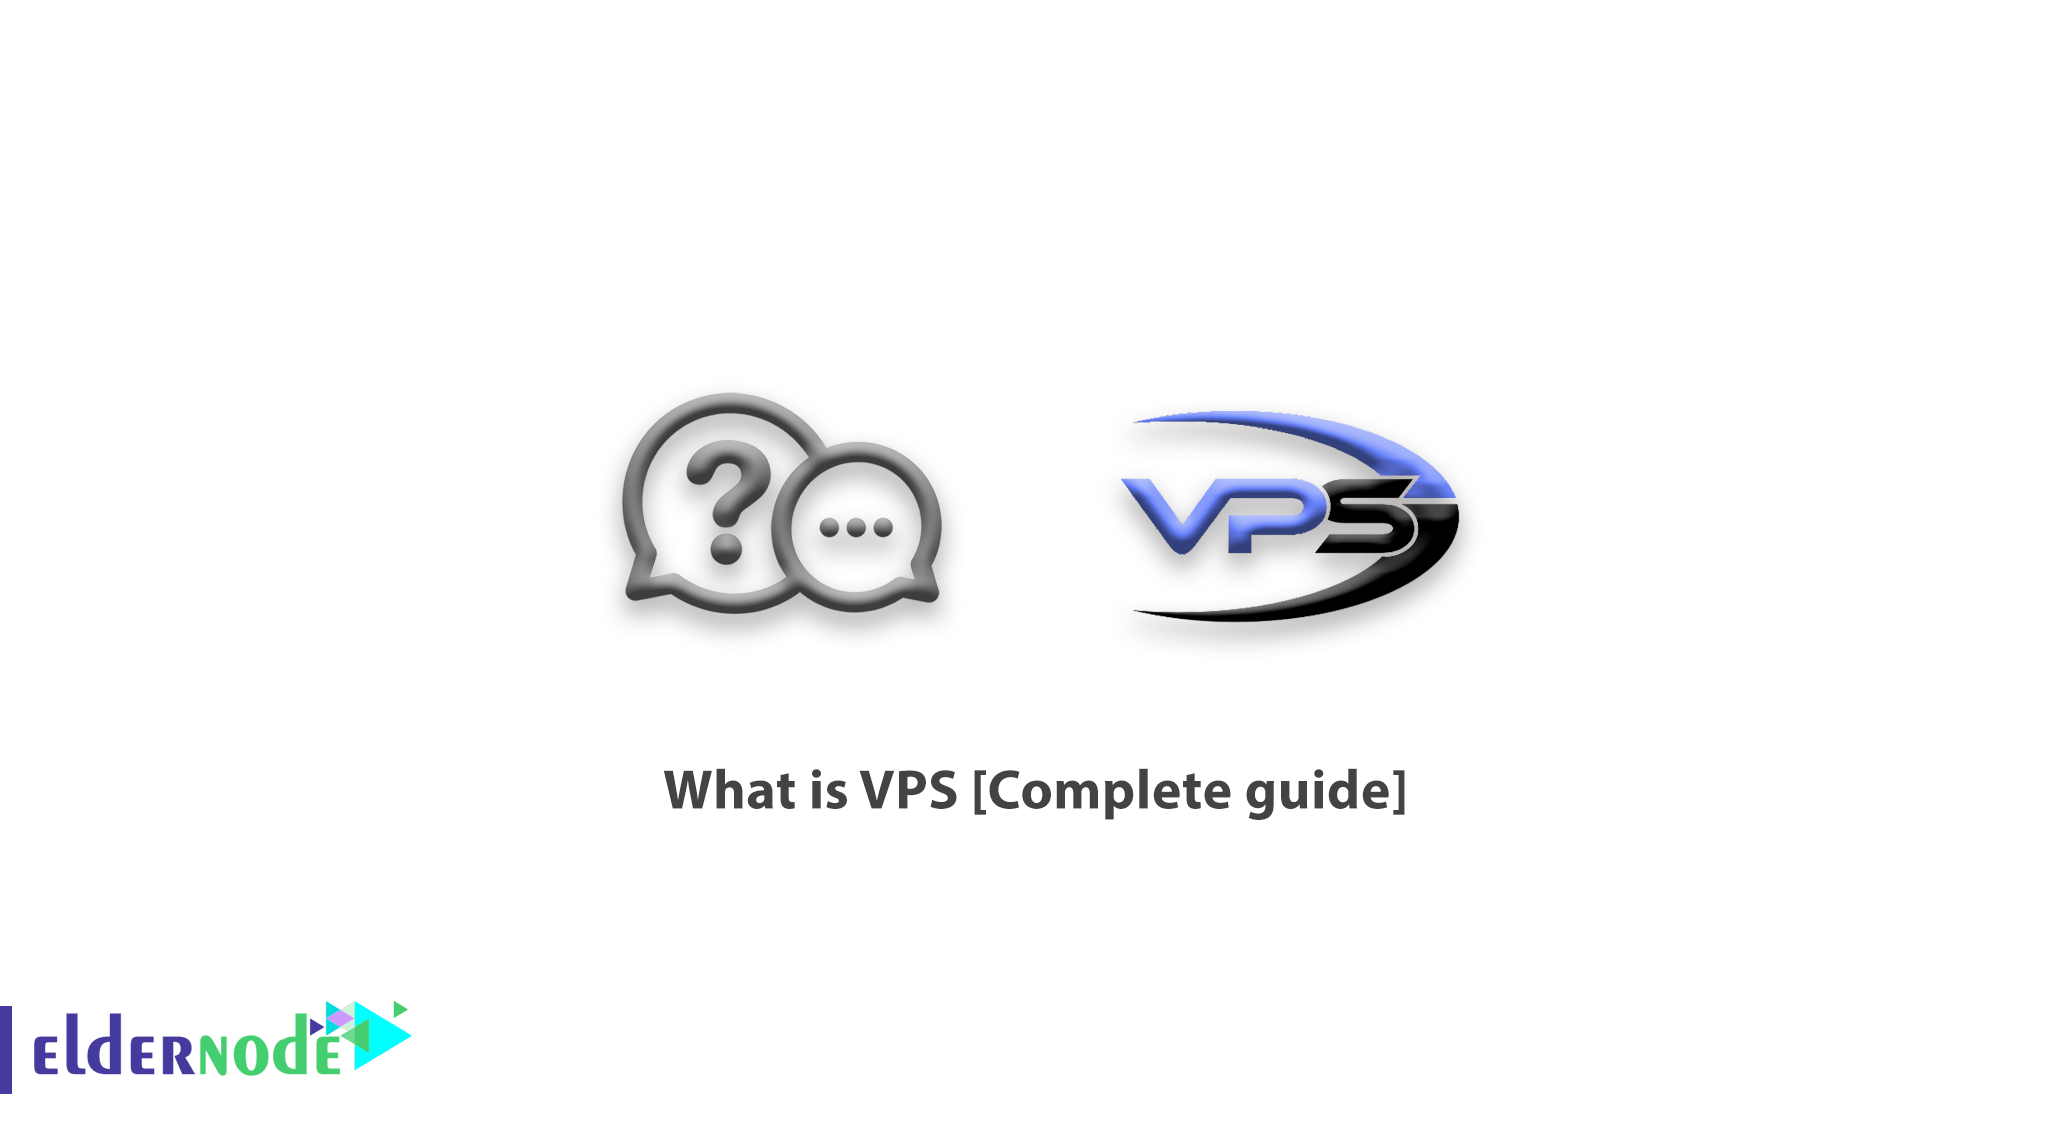 What is VPS - Complete guide